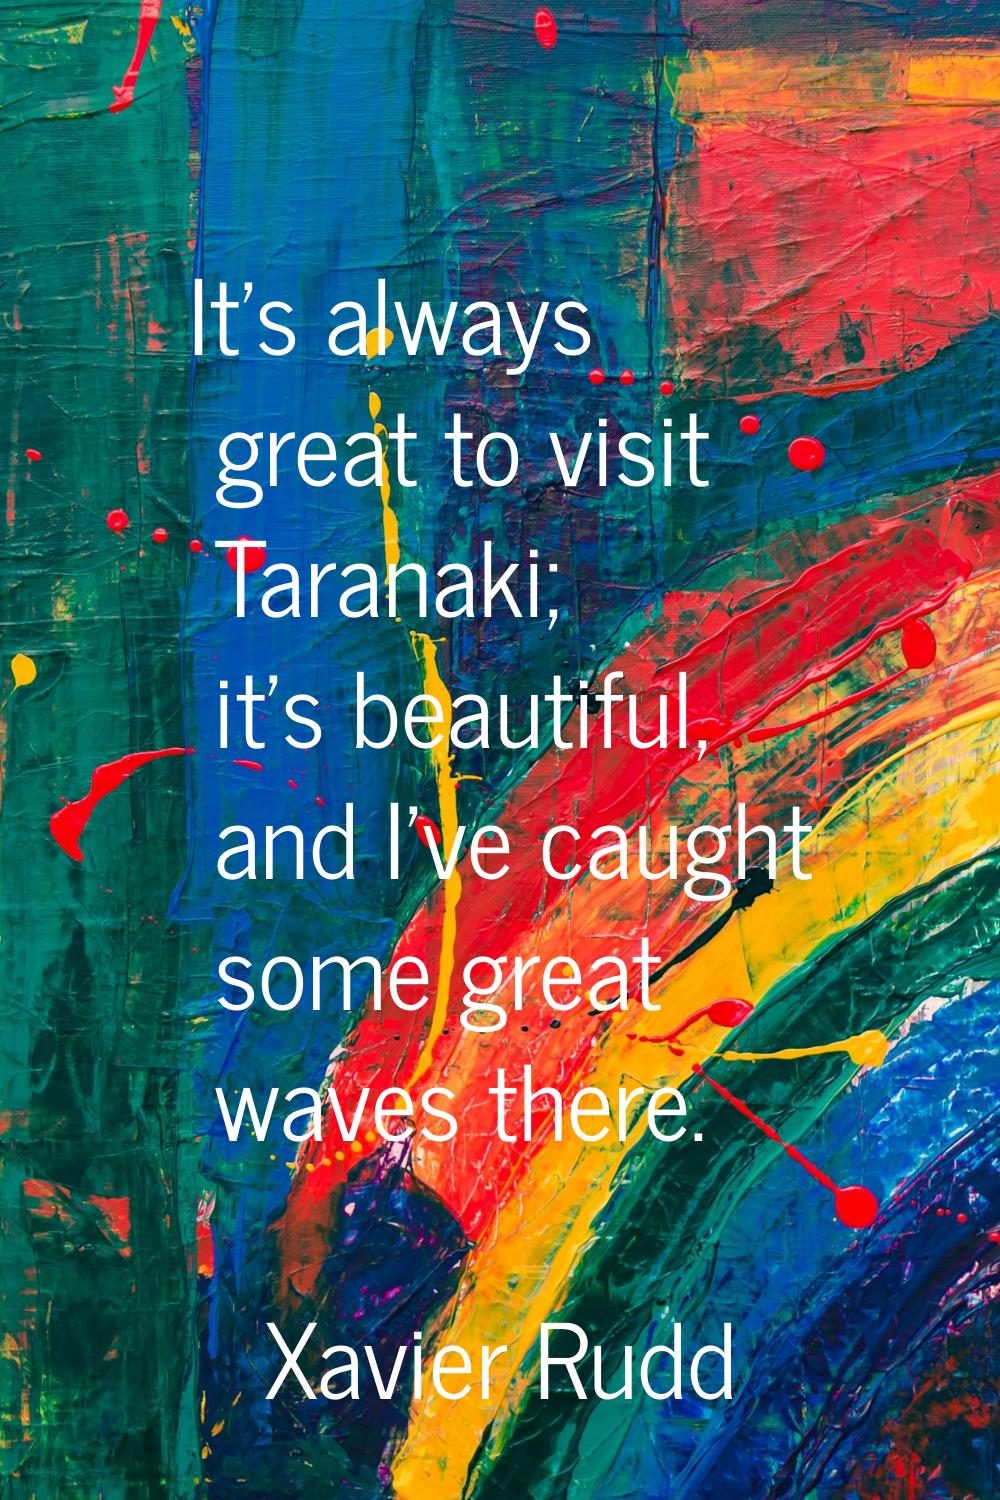 It's always great to visit Taranaki; it's beautiful, and I've caught some great waves there.